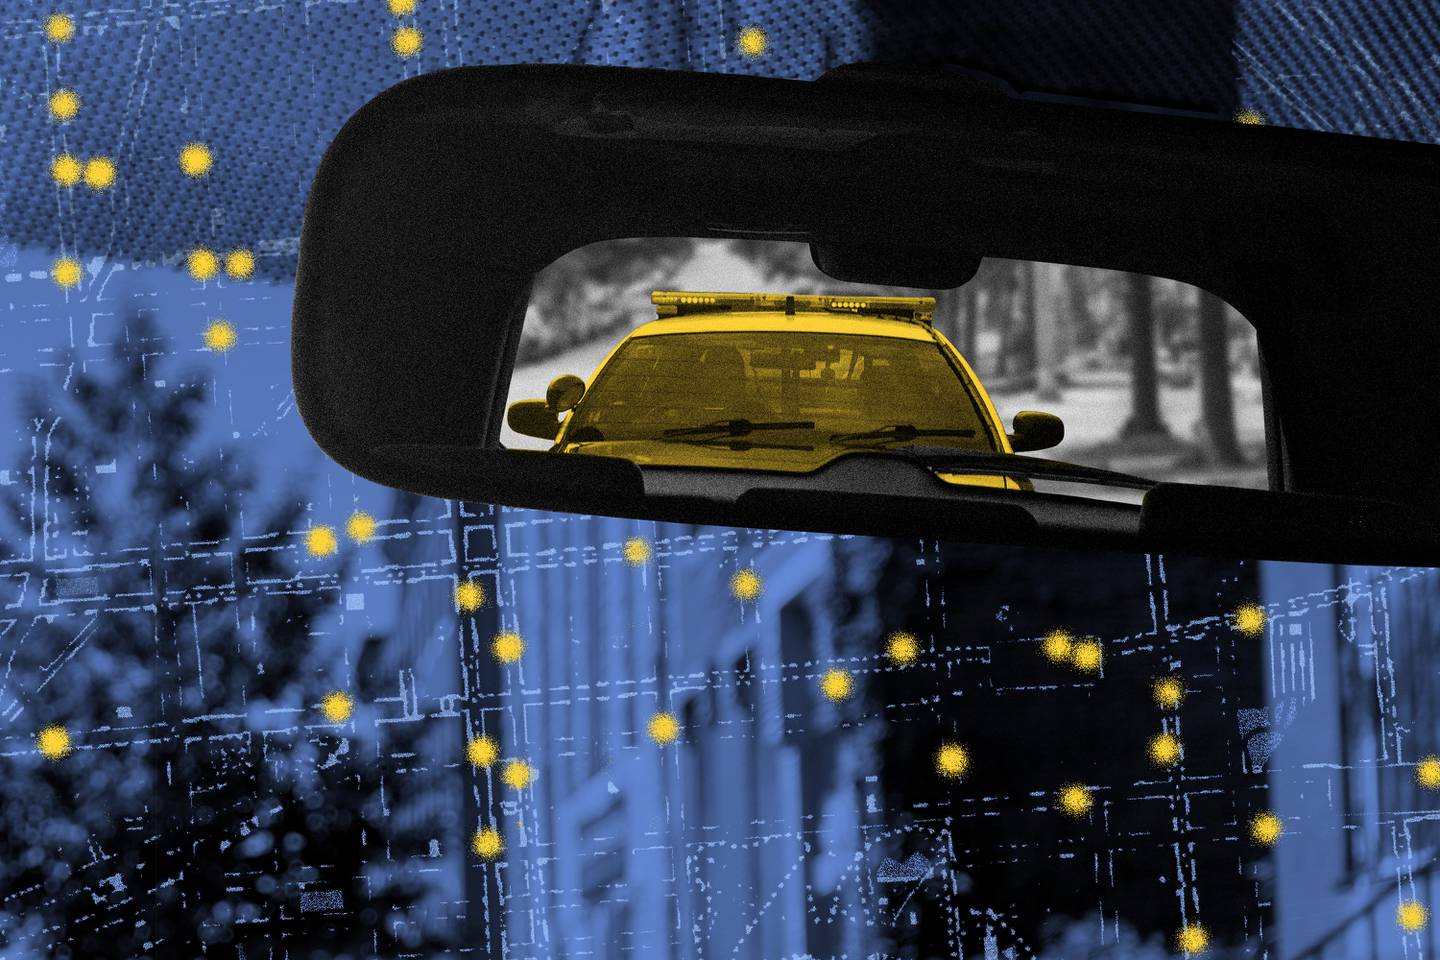 Photo collage showing reflection of police car in a rear view mirror set against a background showing Baltimore row homes, street map and yellow dots scattered on the map.